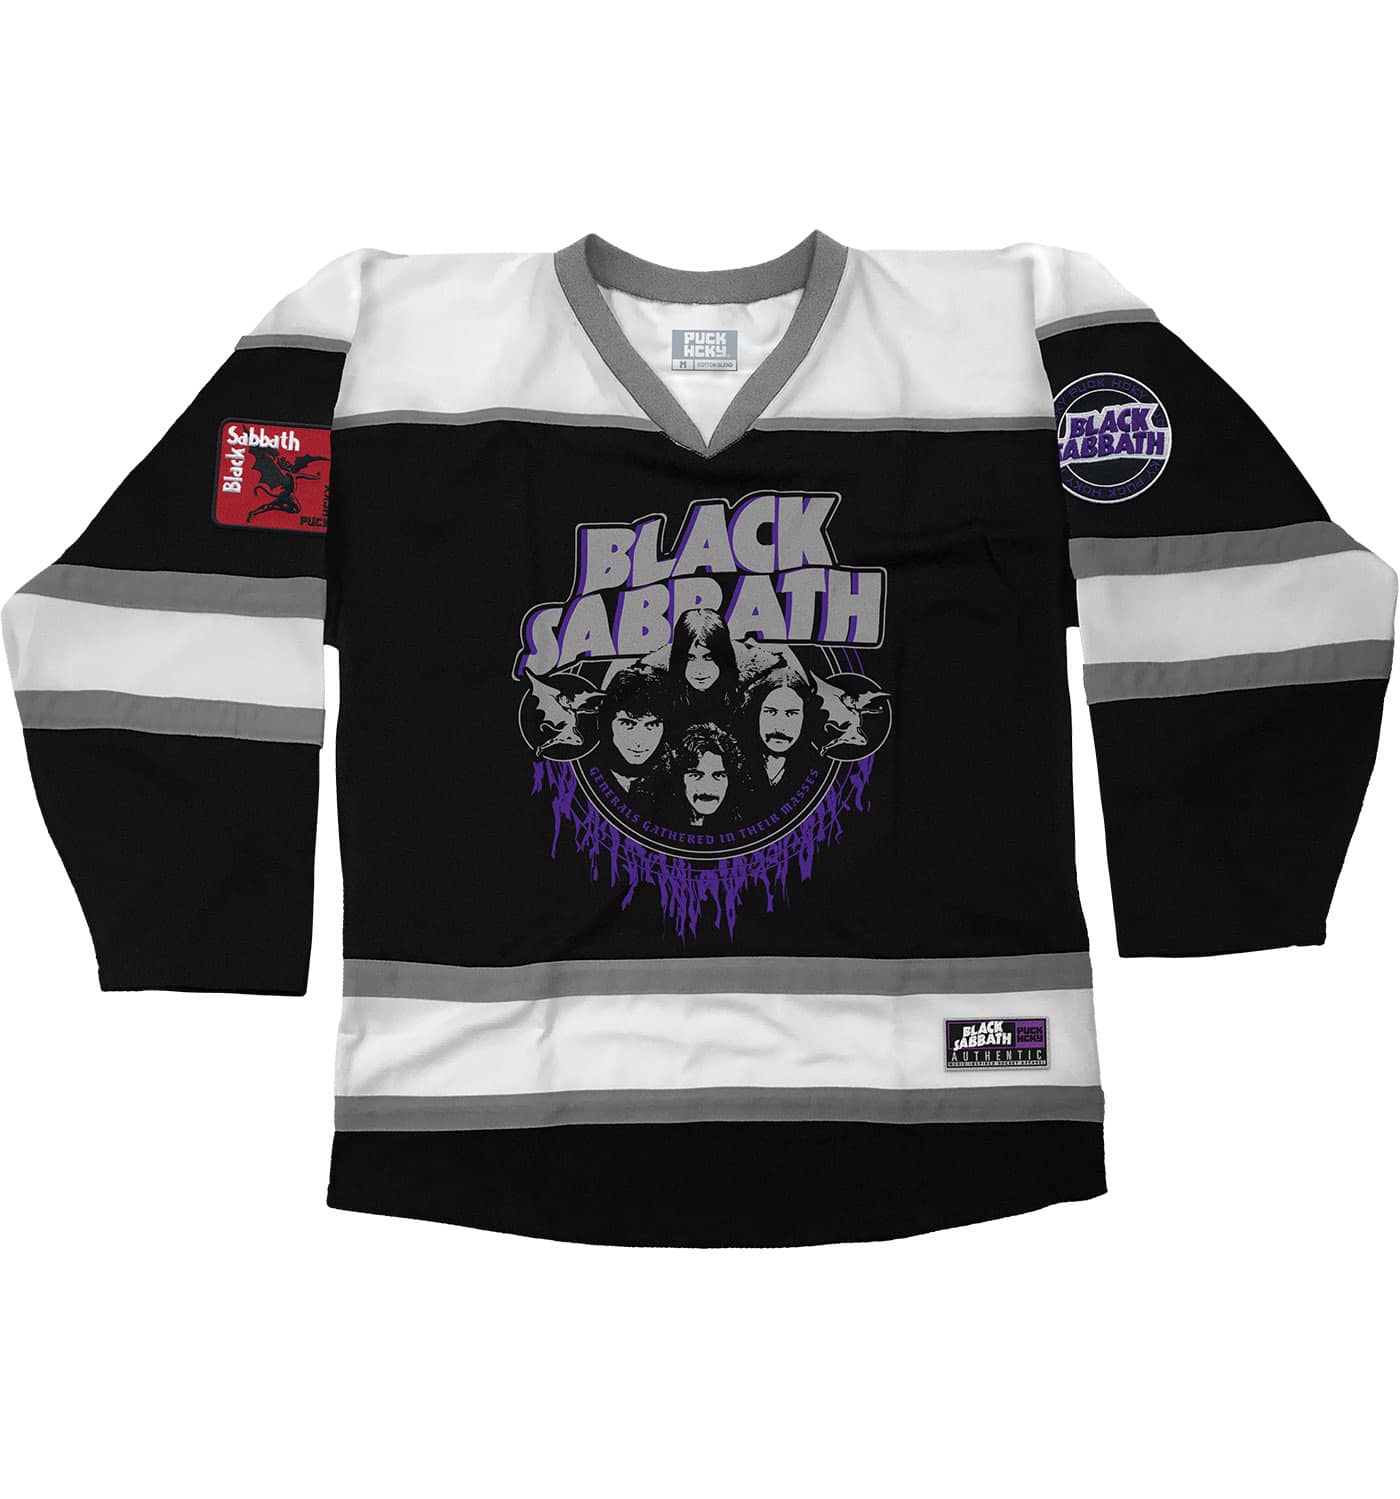 BLACK SABBATH ‘CHILDREN OF THE RINK’ hockey jersey in black, white, and grey front view